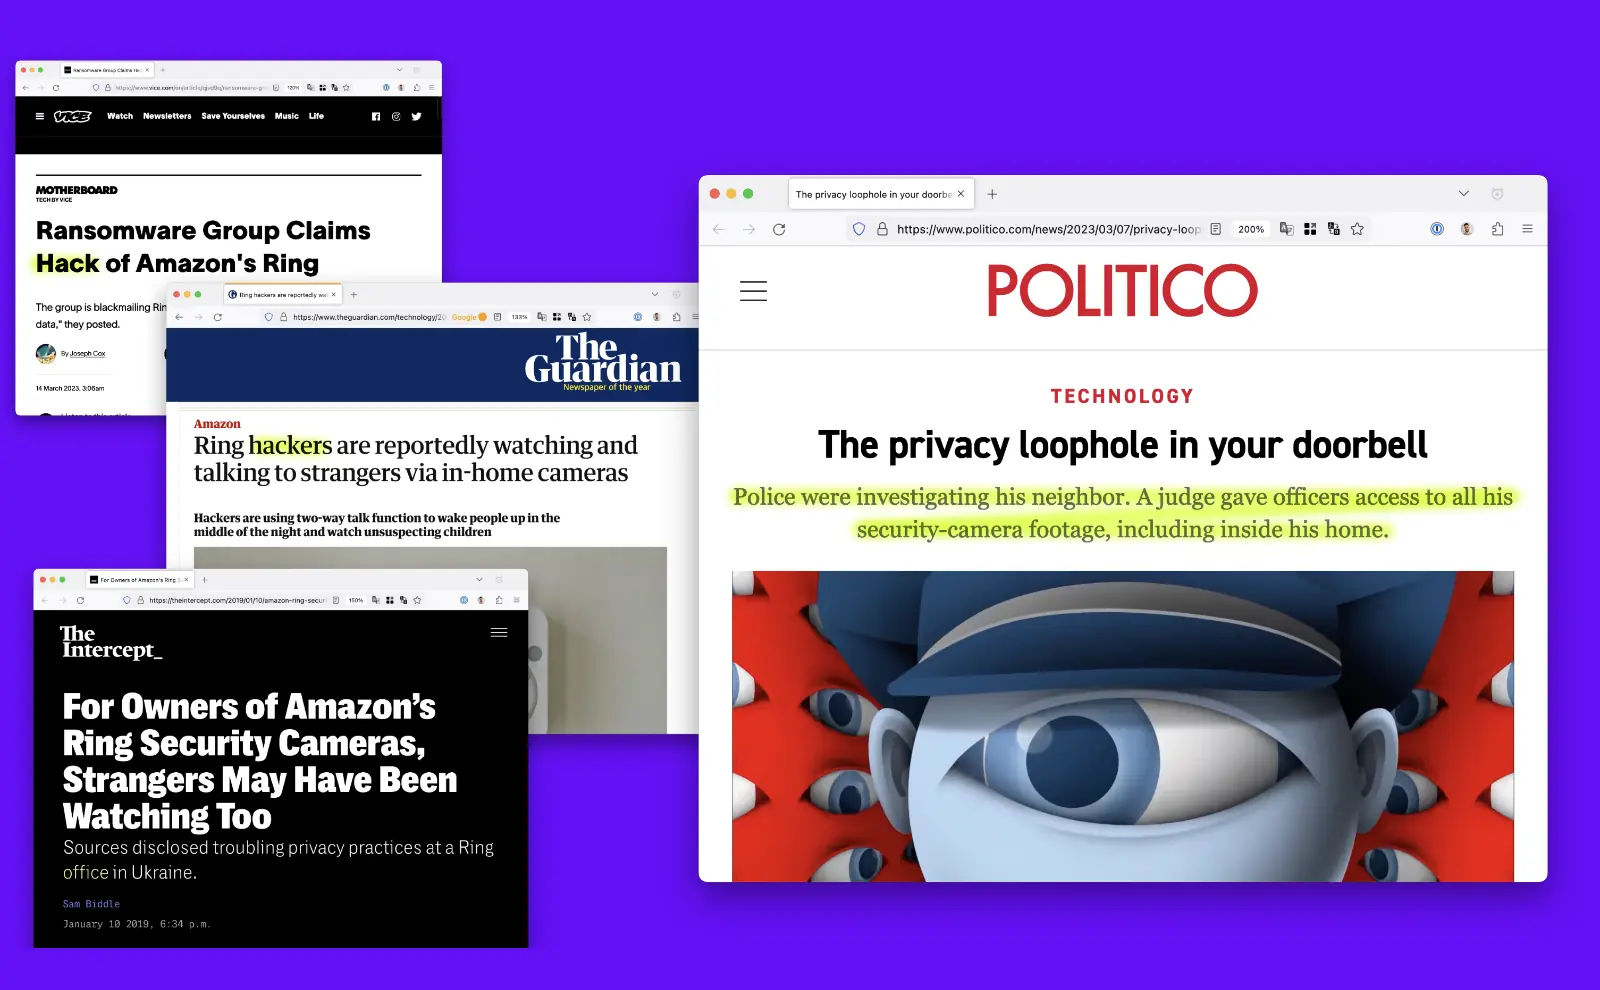 Screenshots of articles. Vice: Ransomware Group Claims Hack of Amazon's Ring. The Guardian: Ring hackers are reportedly watching and talking to strangers via in-home cameras. The Intercept: For Owners of Amazon's Ring Security Cameras, Strangers May Have Been Watching Too. Politico: The privacy loophole in your doorbell. Police were investigating his neighbor. A judge gave officers access to all his security-camera footage, including inside his home.